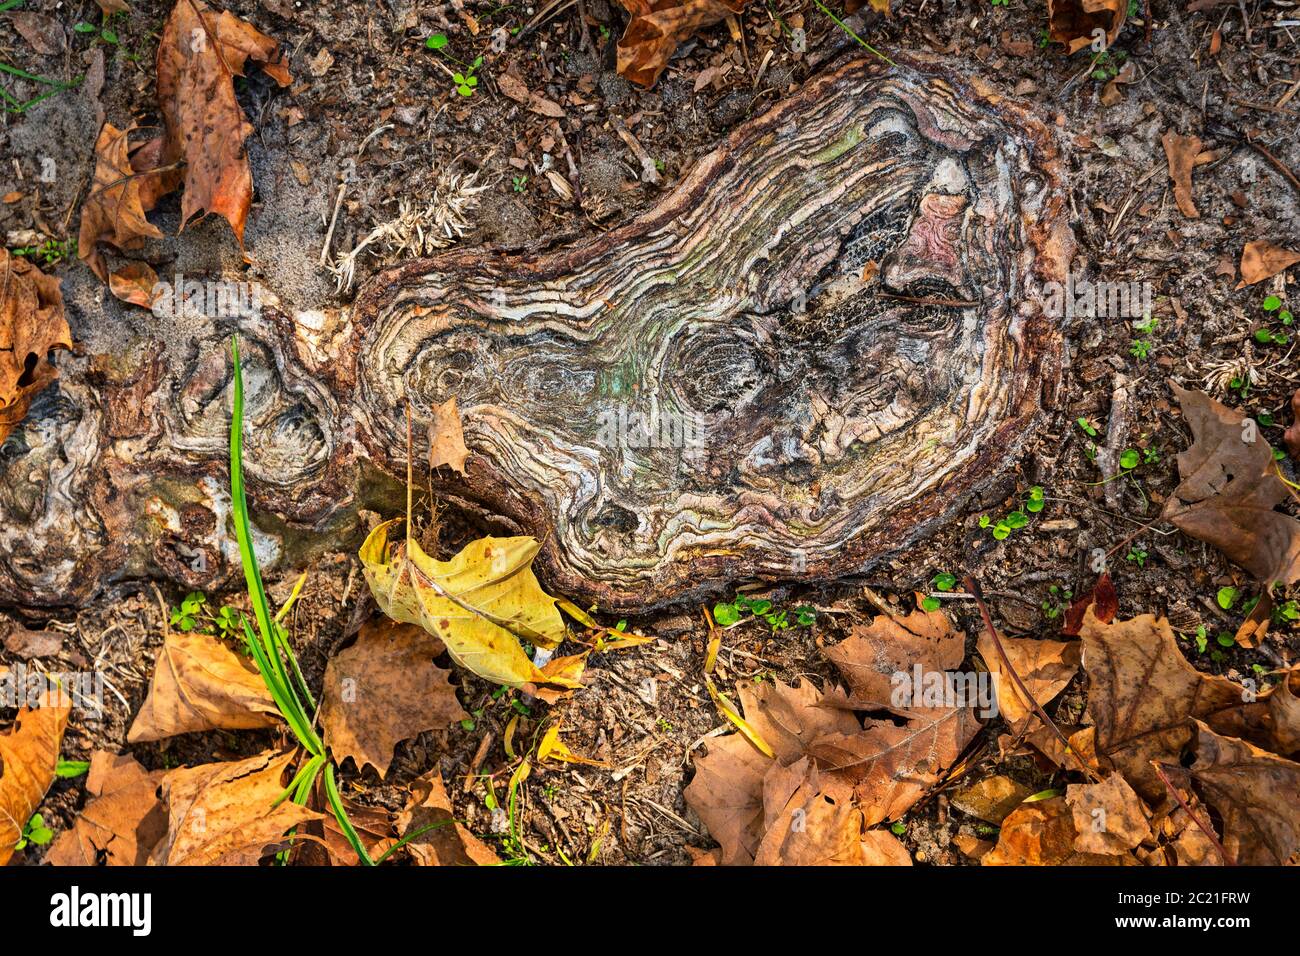 Sycamore tree root system among fallen Autumn leaves. Stock Photo